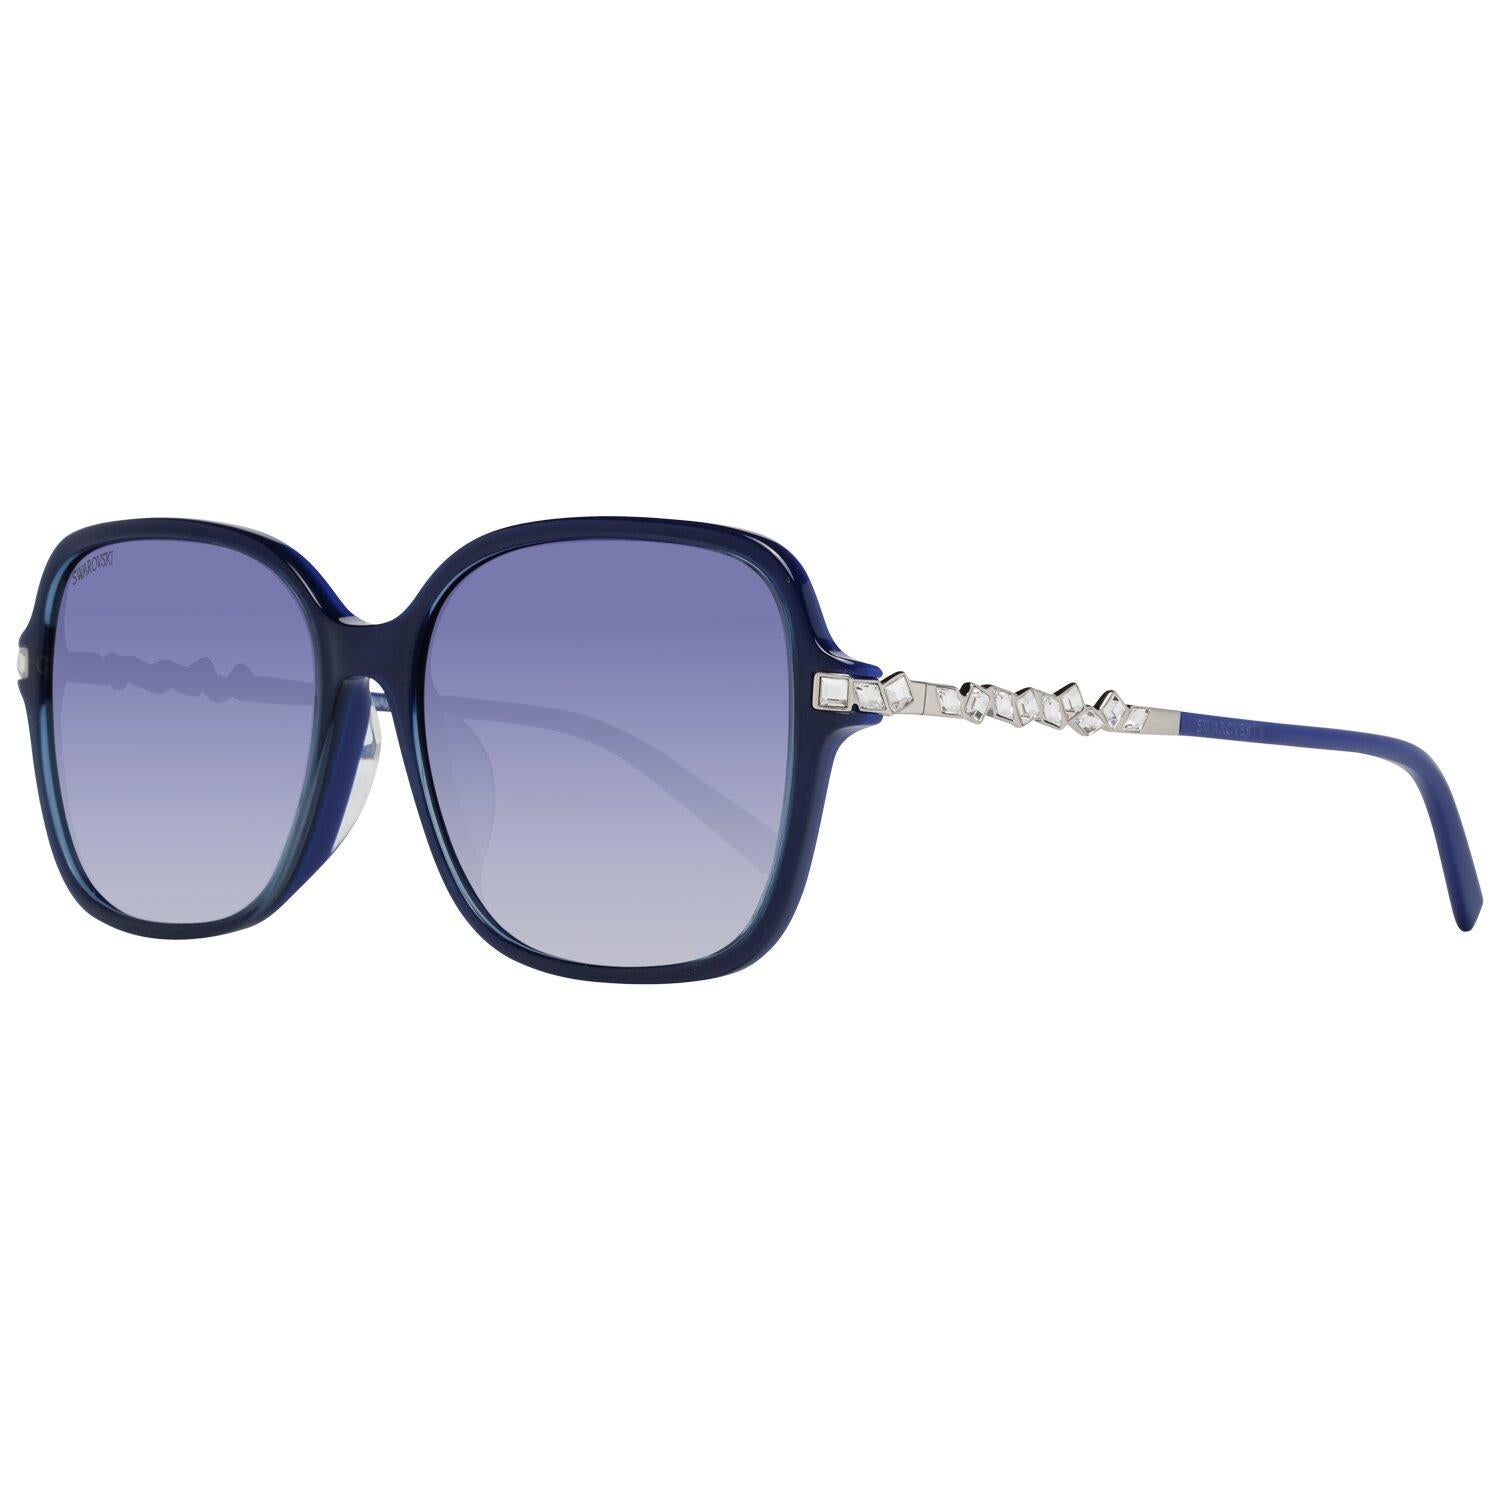 DetailsMATERIAL: AcetateCOLOR: BlueMODEL: SK0265-F 5890WGENDER: WomenCOUNTRY OF MANUFACTURE: ChinaTYPE: SunglassesORIGINAL CASE?: YesSTYLE: SquareOCCASION: CasualFEATURES: LightweightLENS COLOR: BlueLENS TECHNOLOGY: GradientYEAR MANUFACTURED: